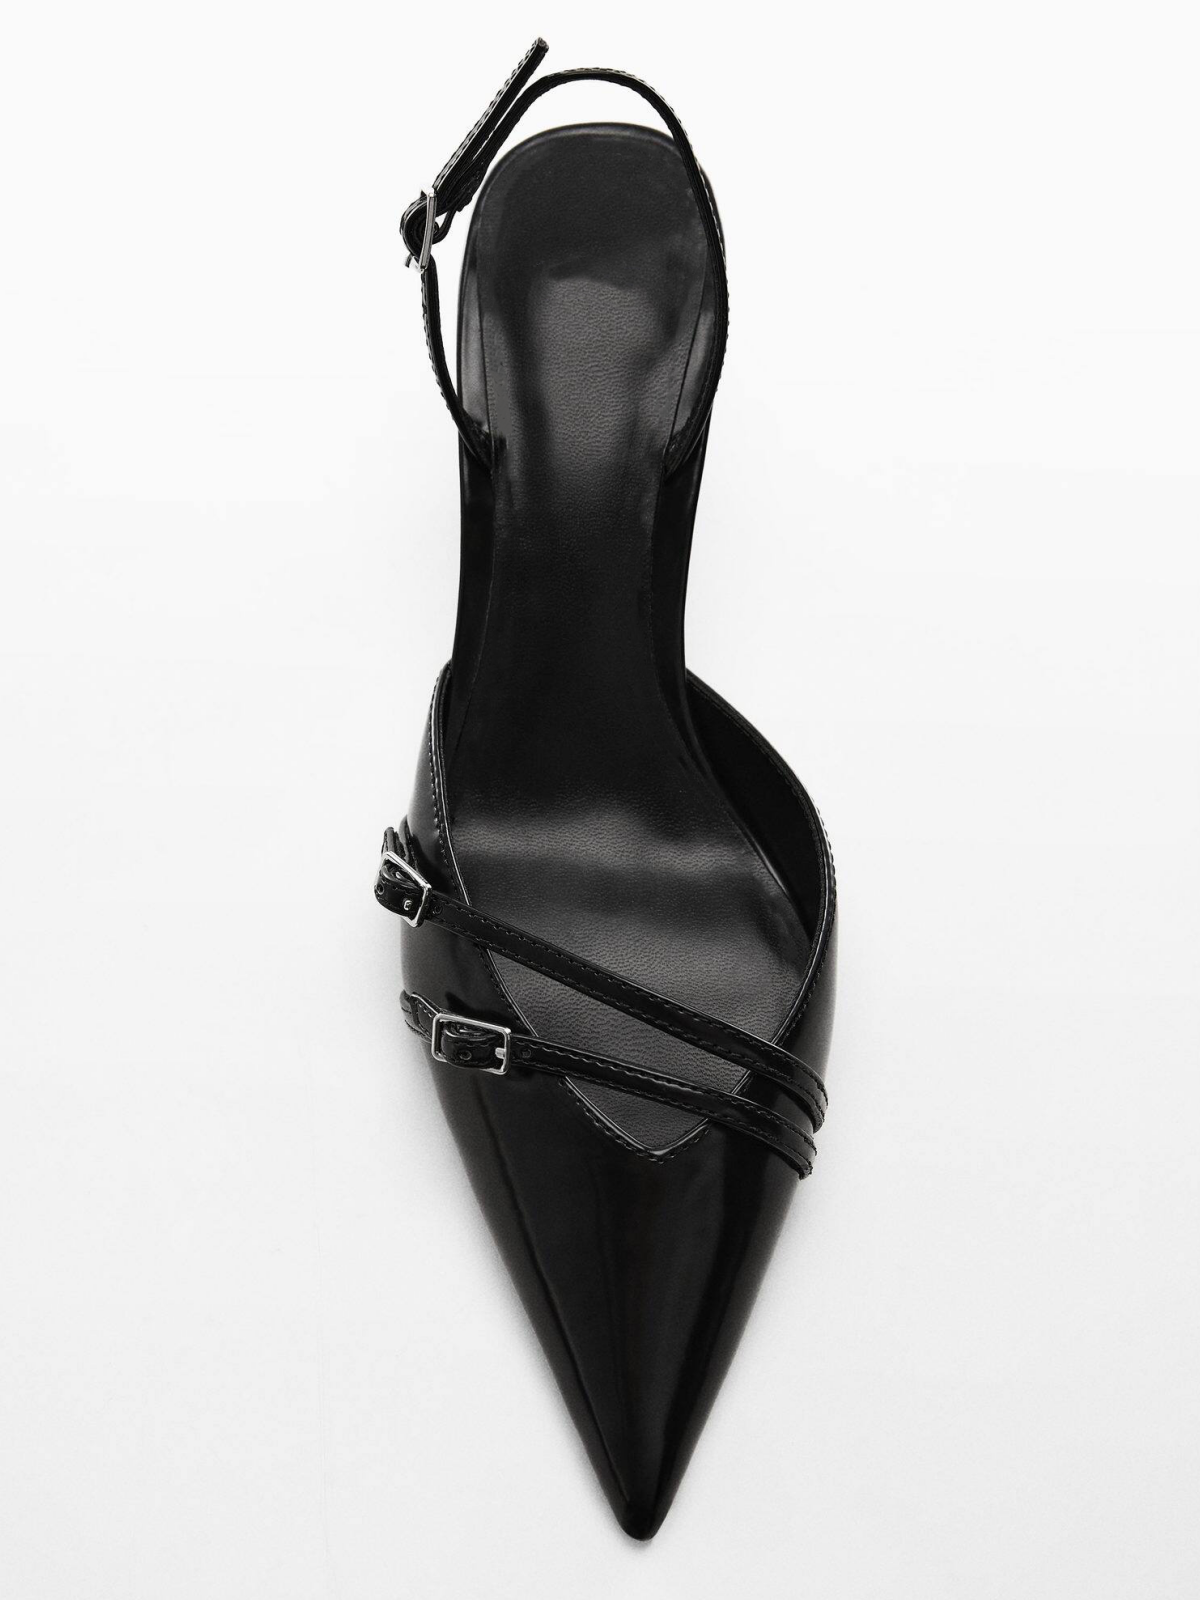 Black Buckled Strappy Pointy Kitten Heels Slingback Courts Pumps